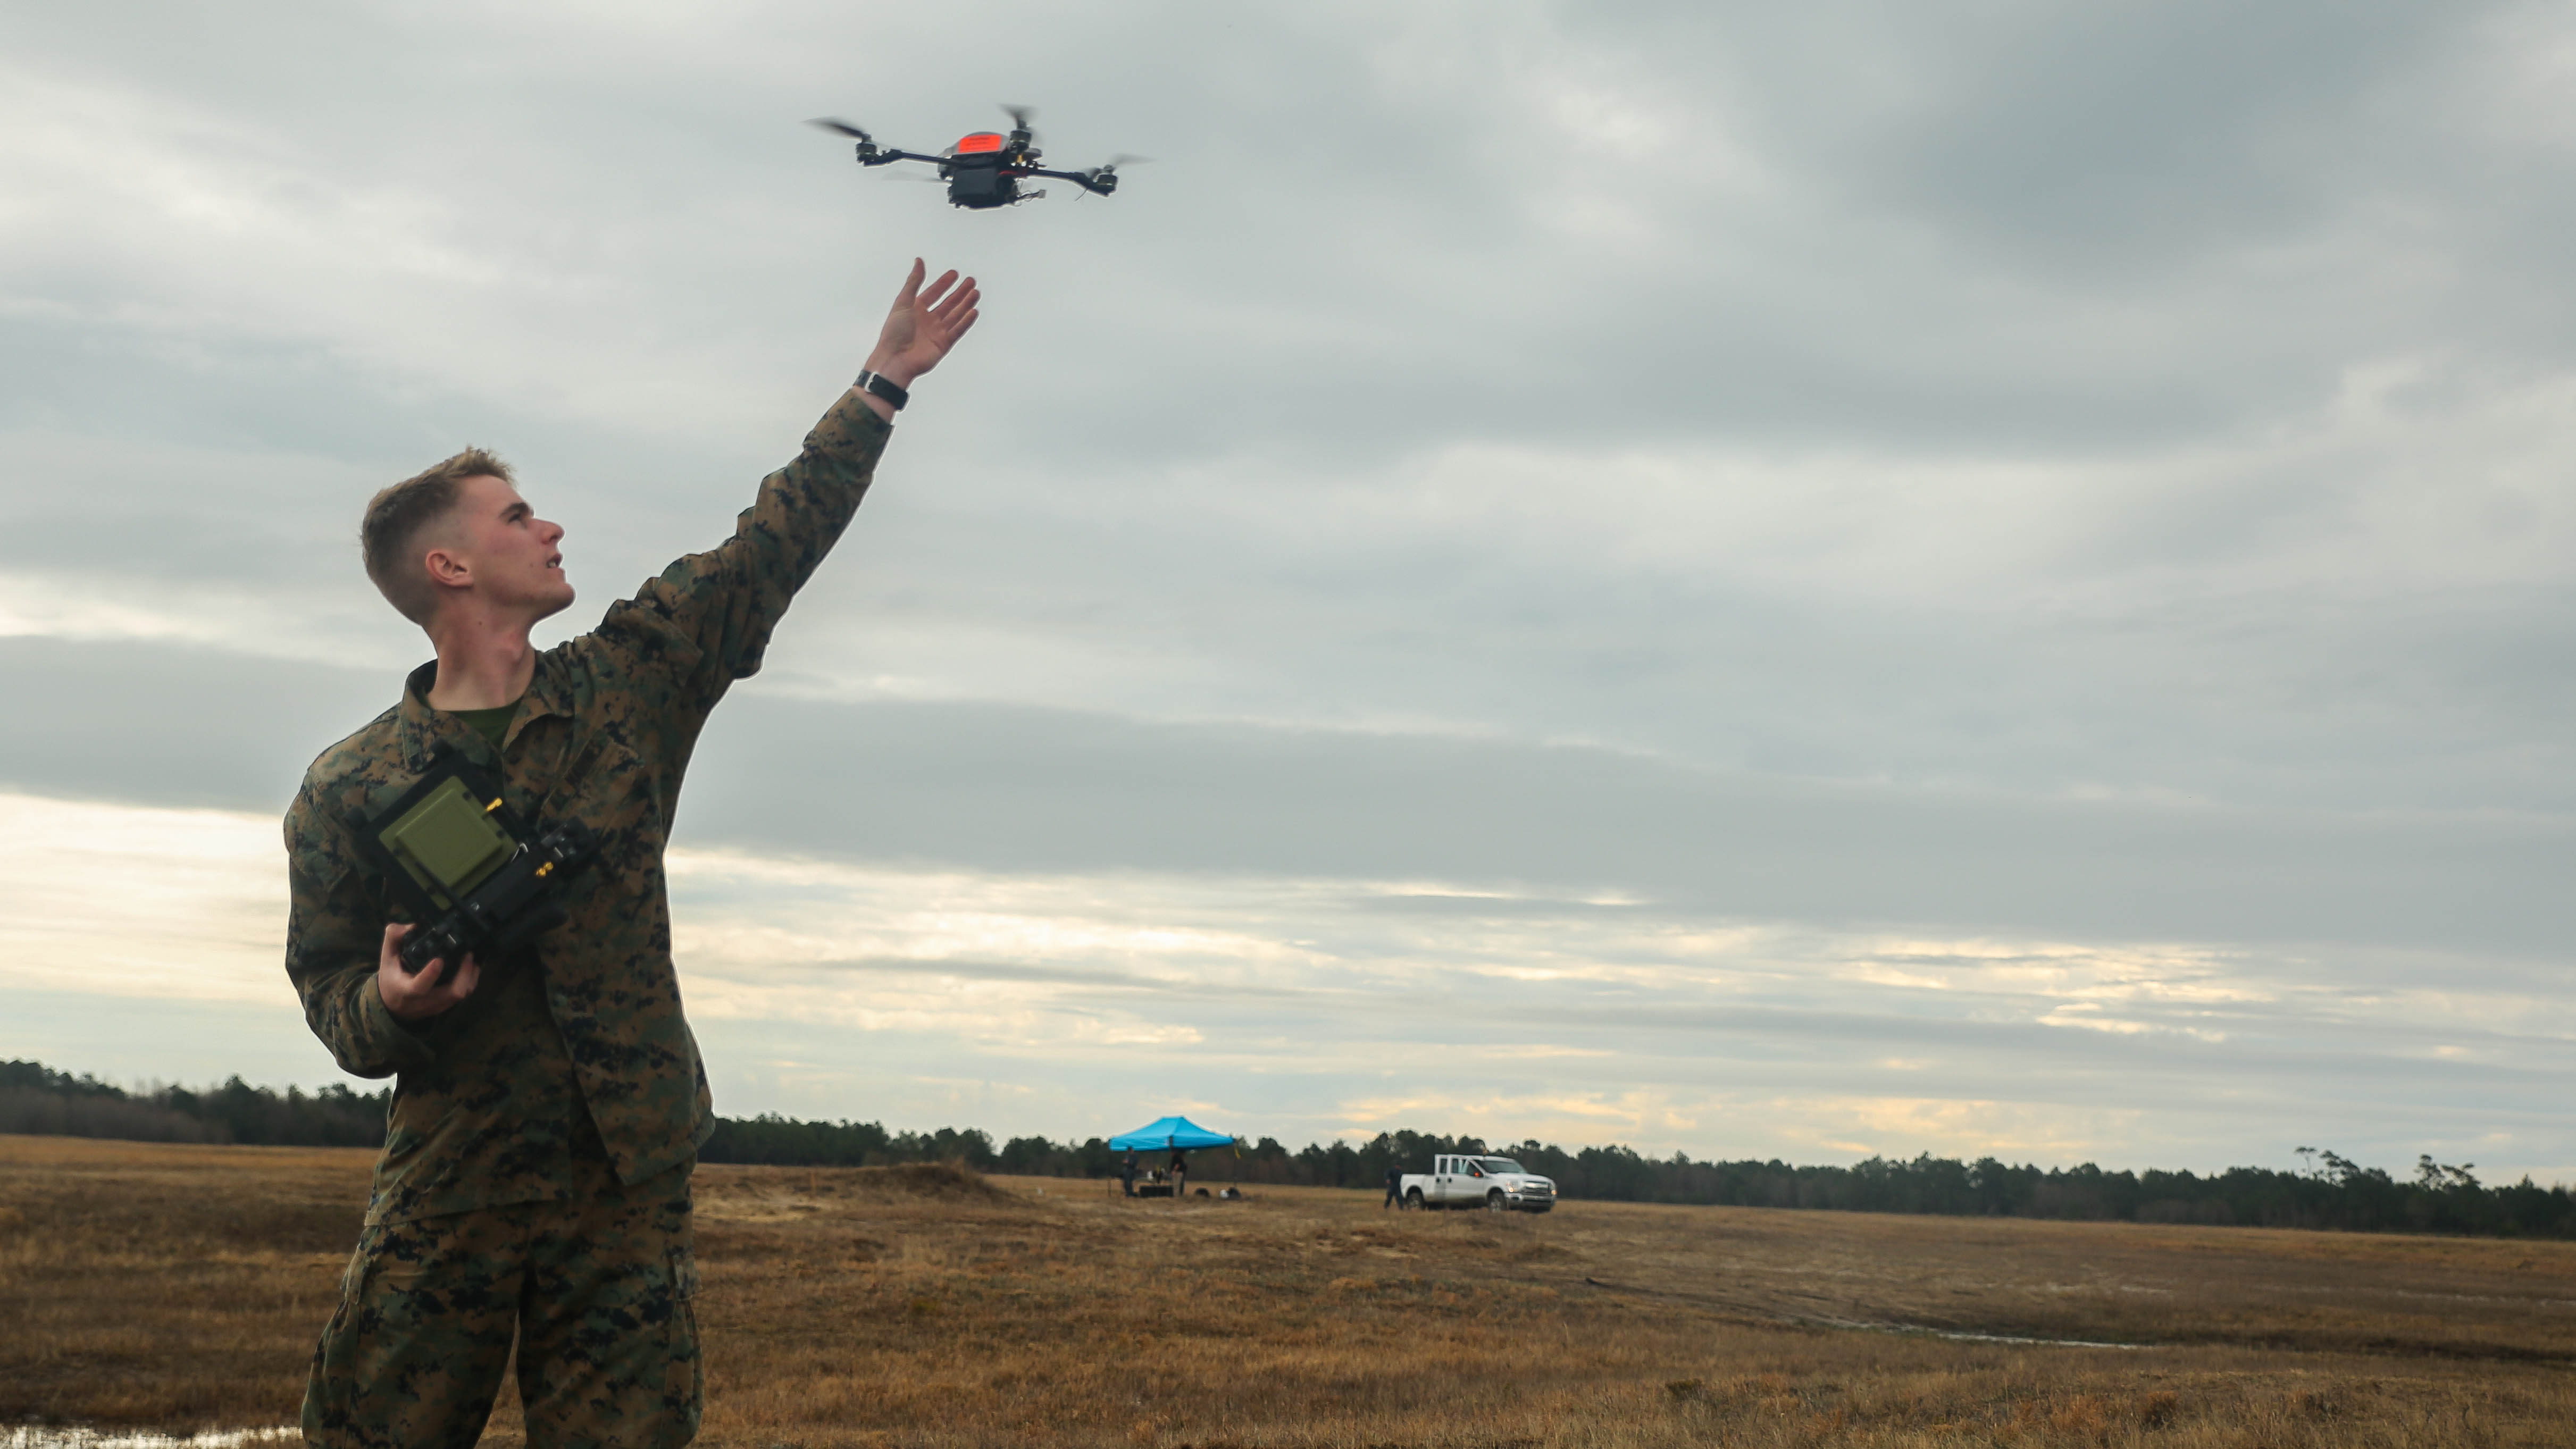 Mini drones: A growing interest as a military capability